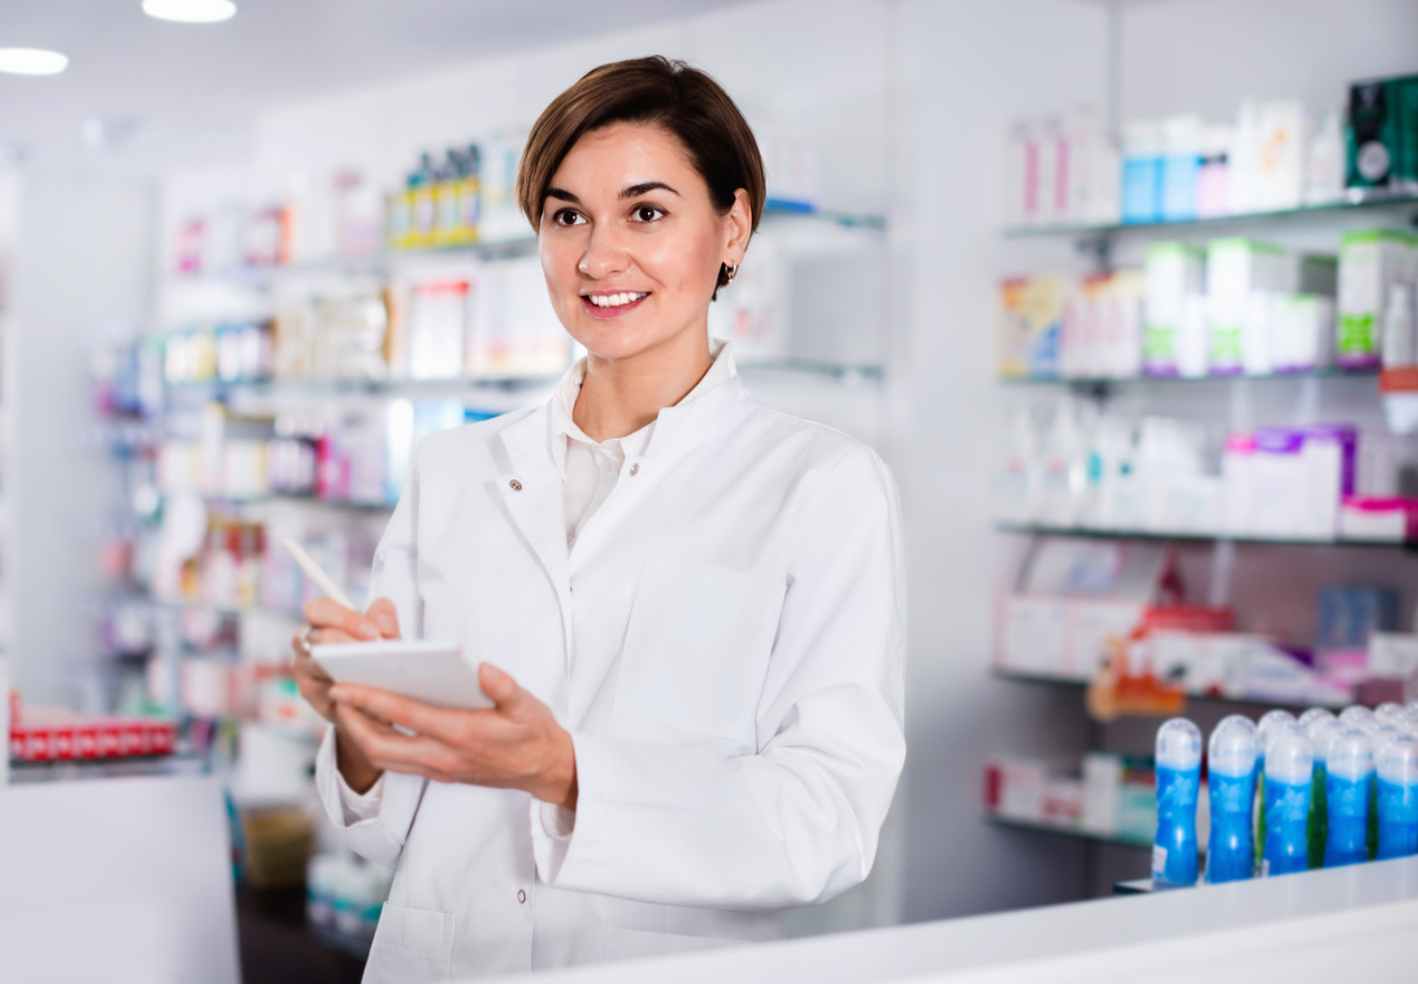 Federal Mandates for COVID-19 Mean Enhanced Inventory, Scheduling: What Pharmacists Need to Know 